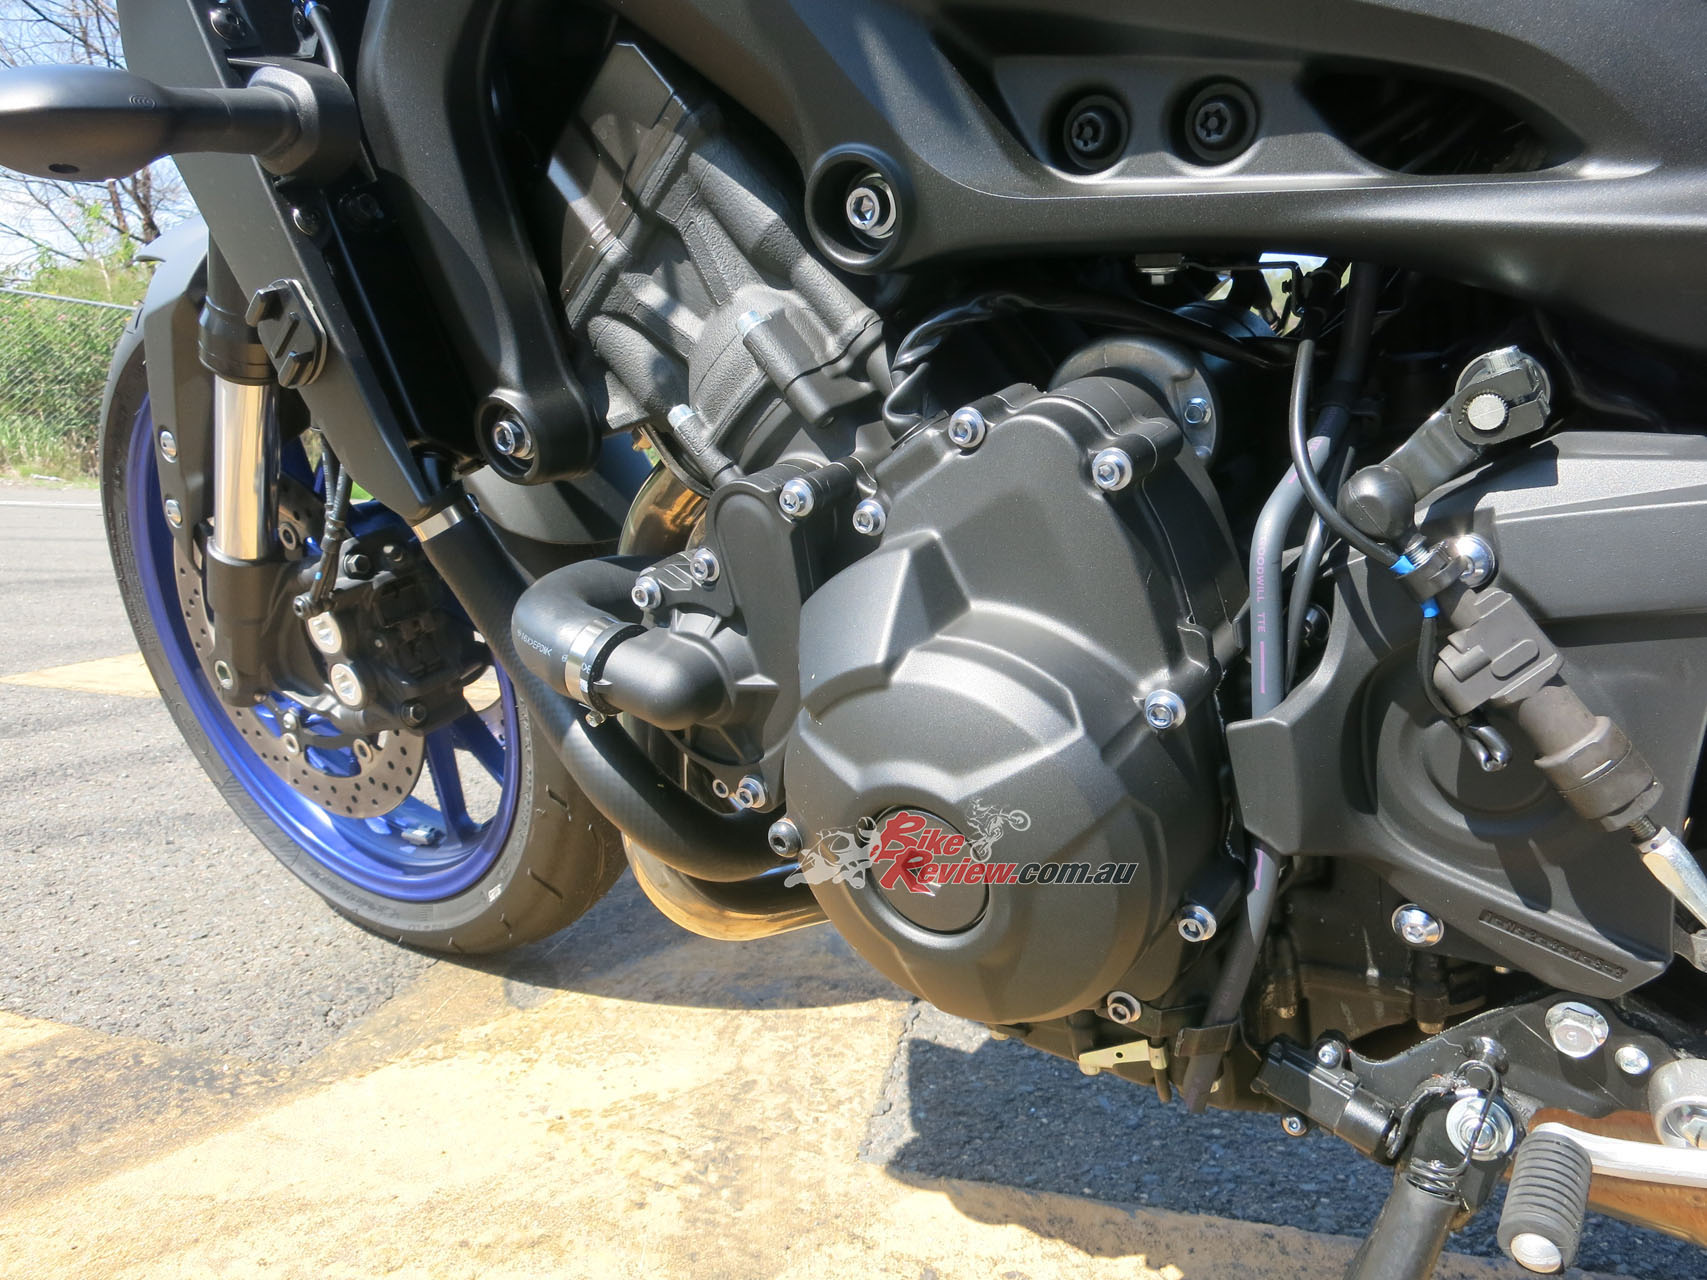 The Yamaha MT-09 seems to have benefited from revised fueling as well as an assist and slipper clutch